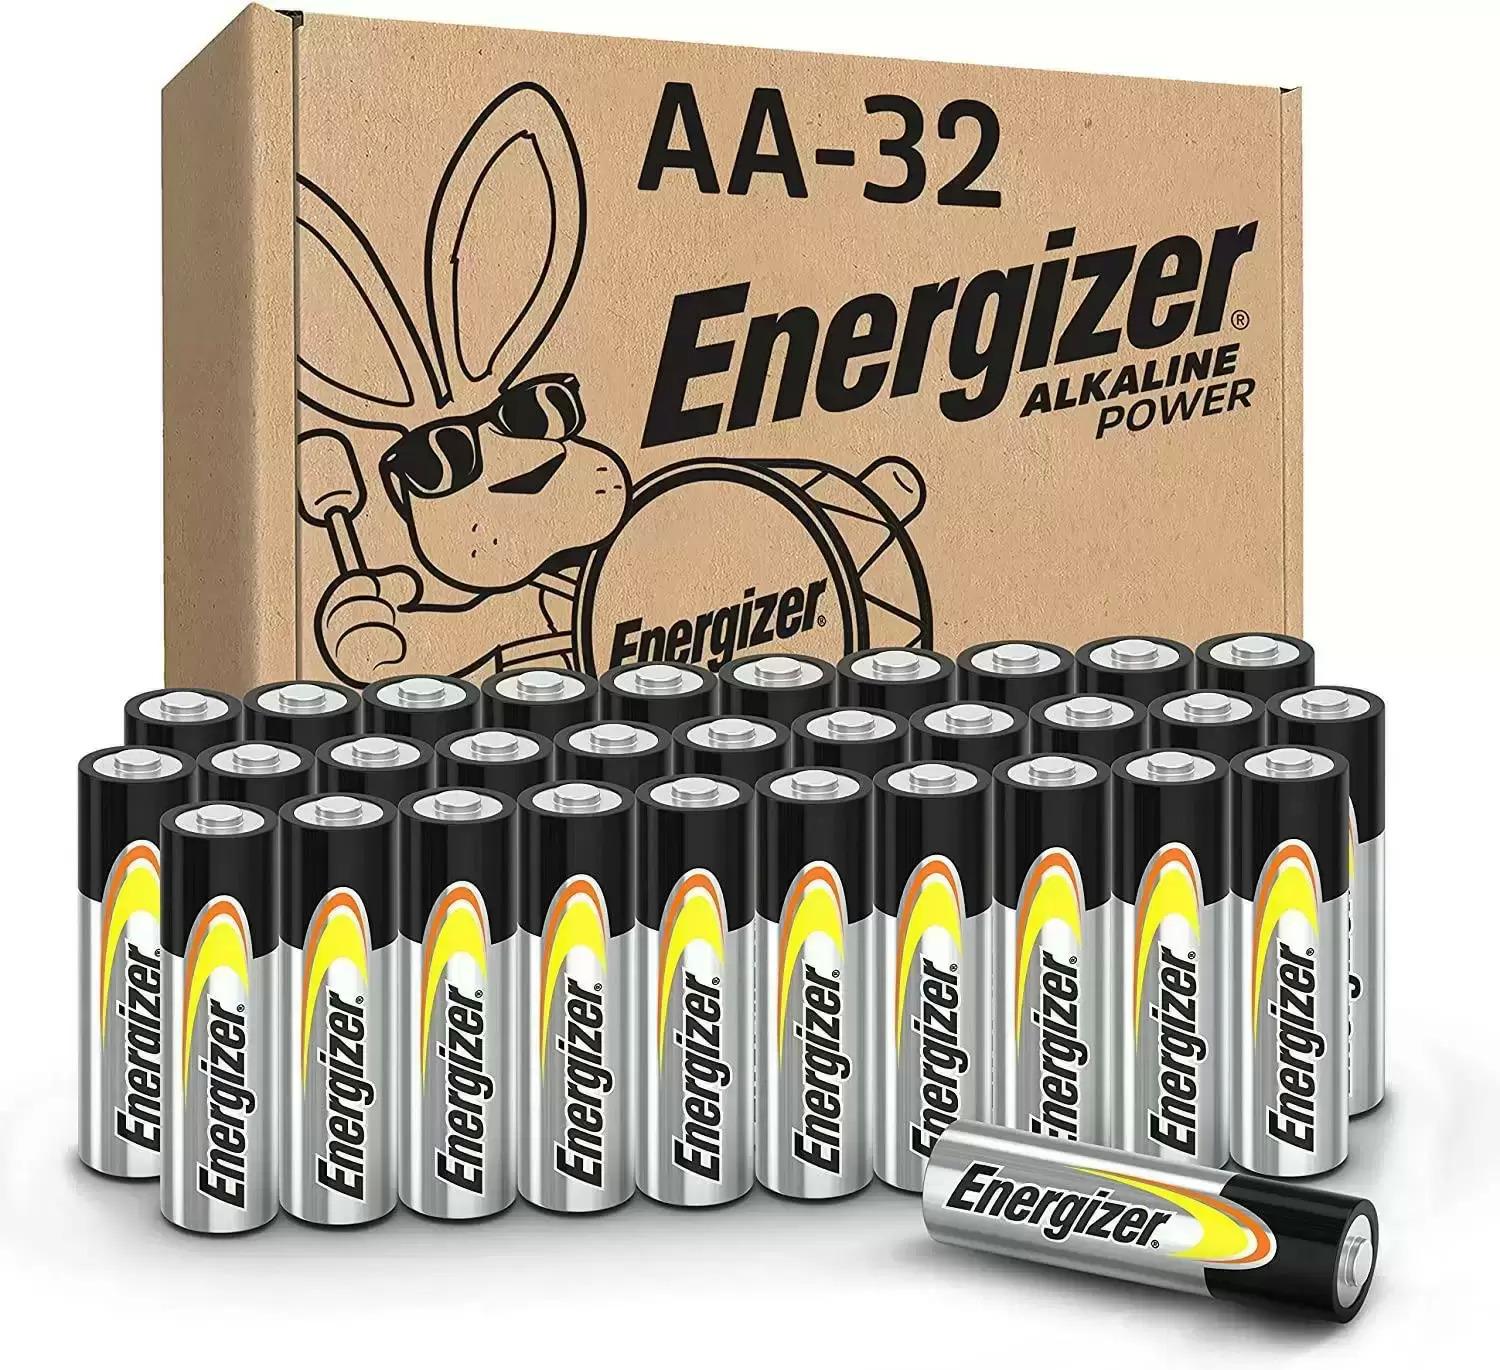 Energizer AA Alkaline Batteries 32 Pack for $13.28 Shipped